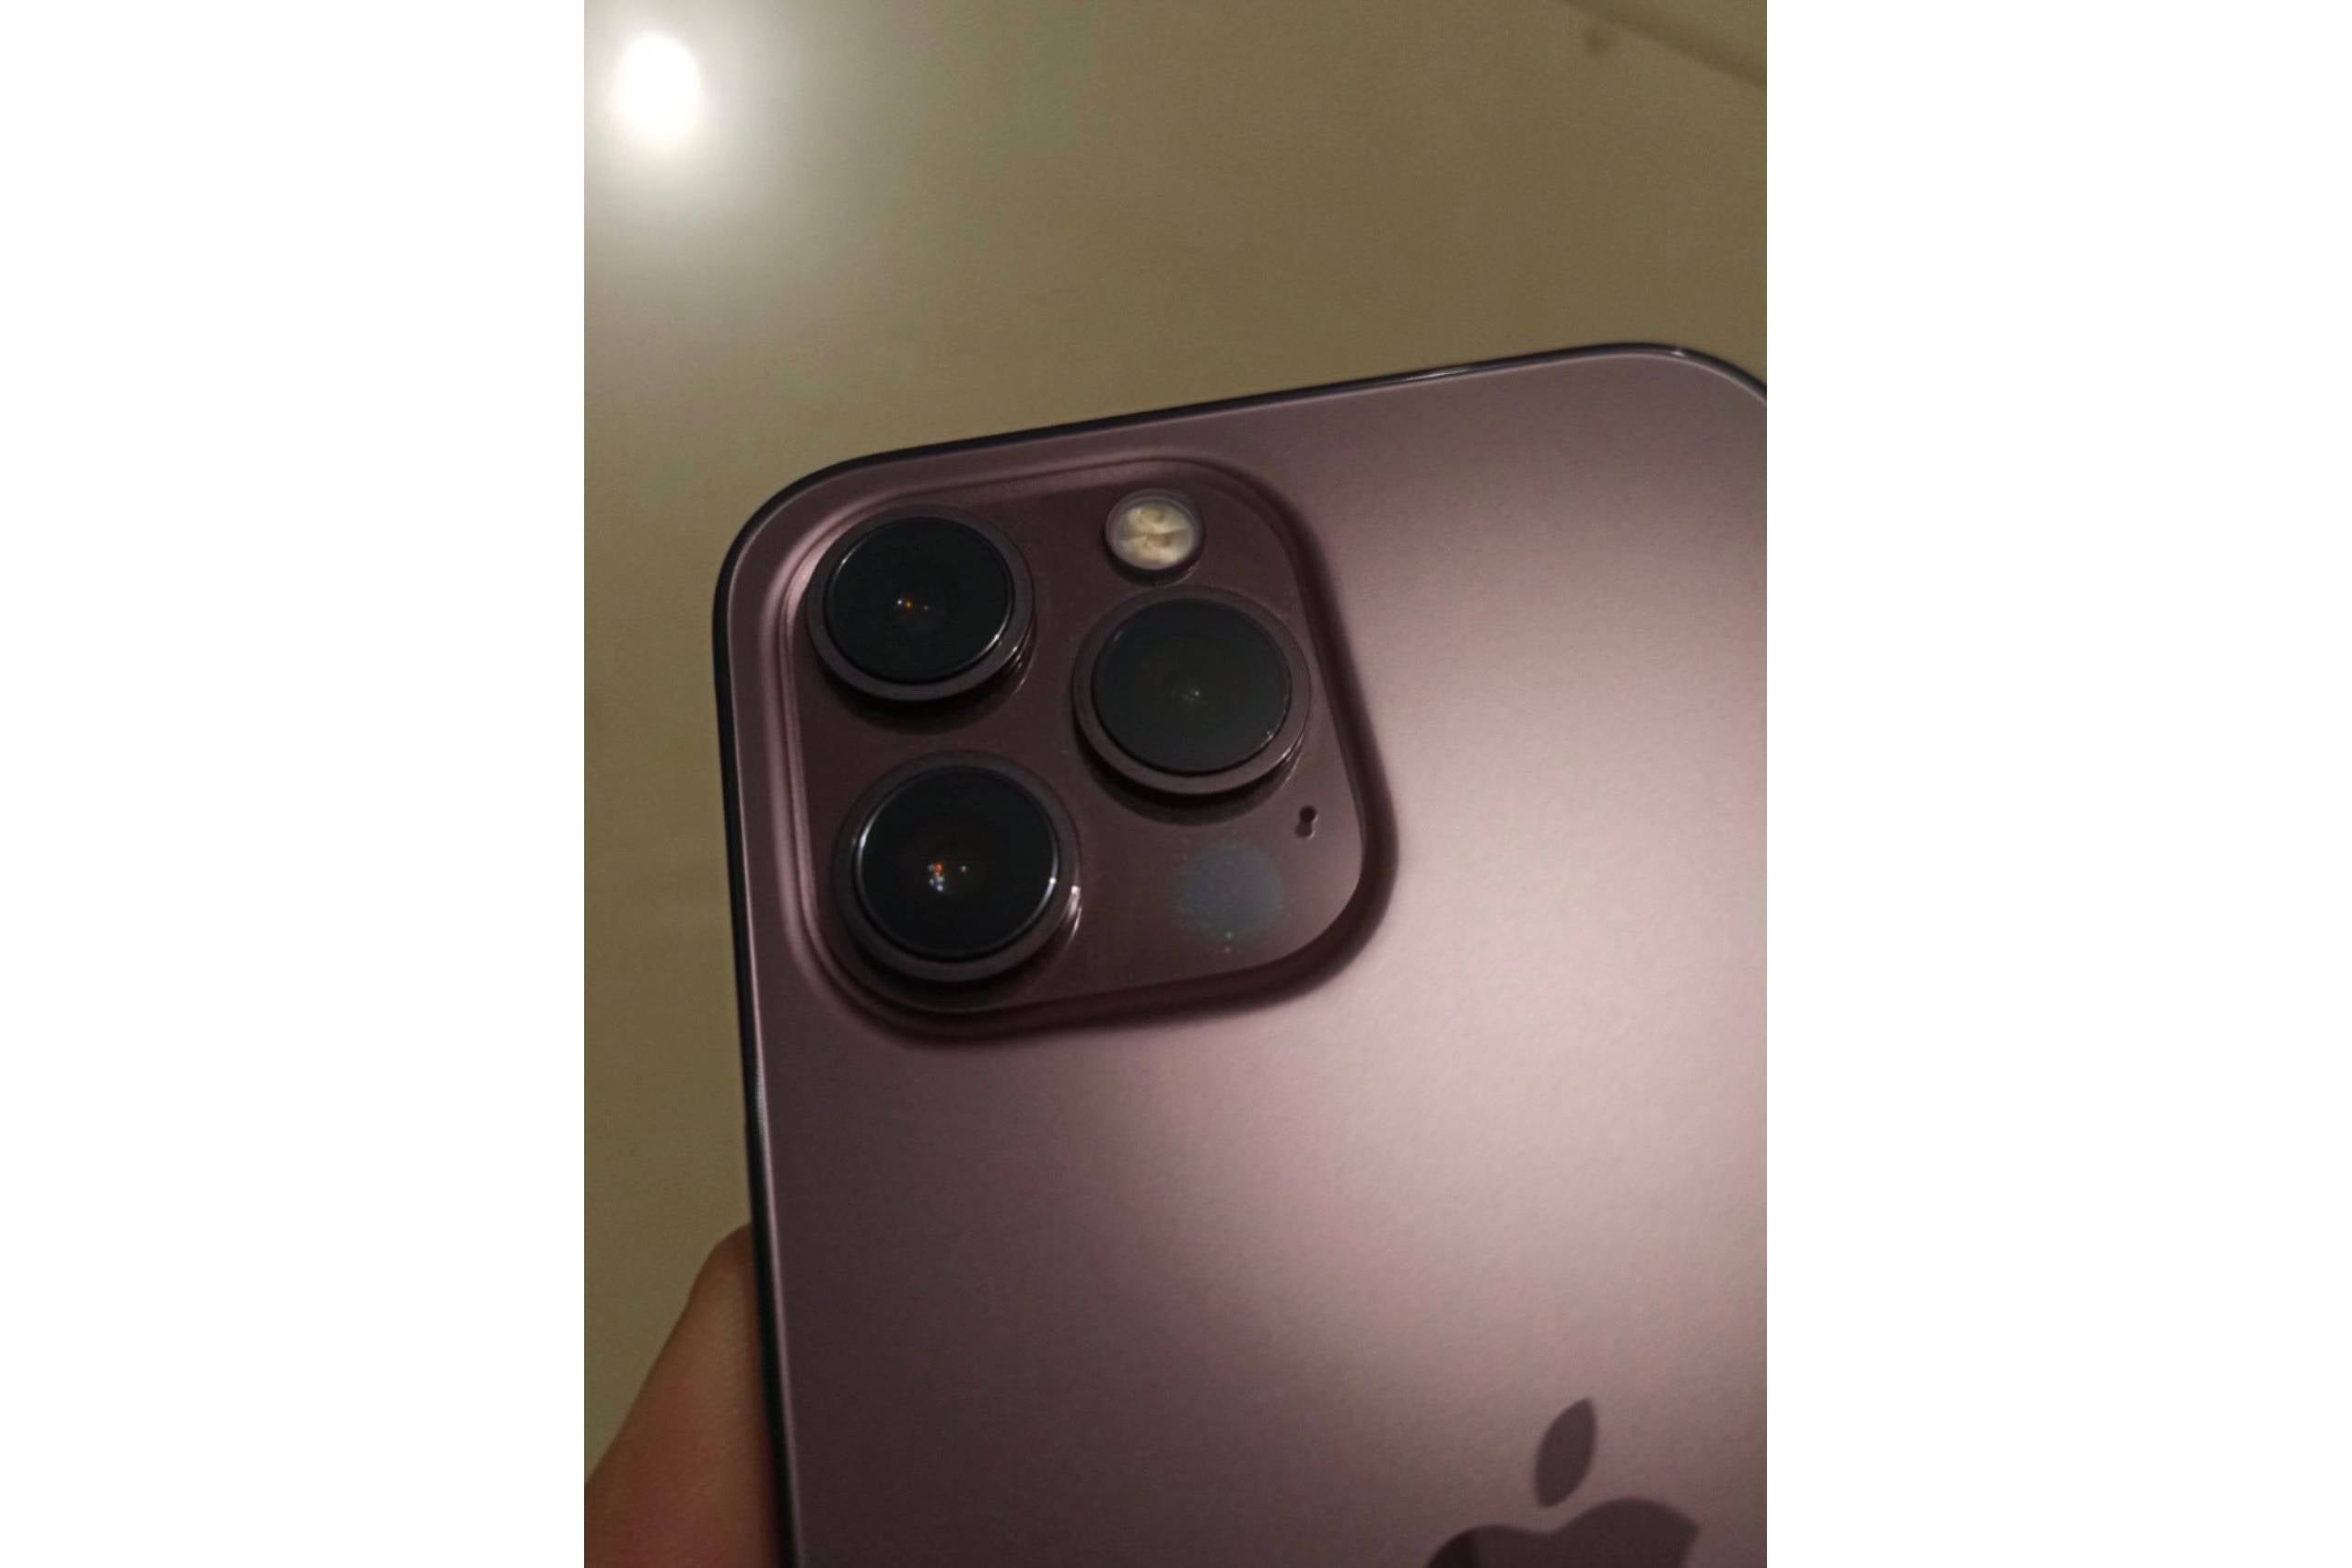 Image seems to show the rumored Rose Gold iPhone 13 Pro - New images claim to show the back of the Rose Gold iPhone 13 Pro